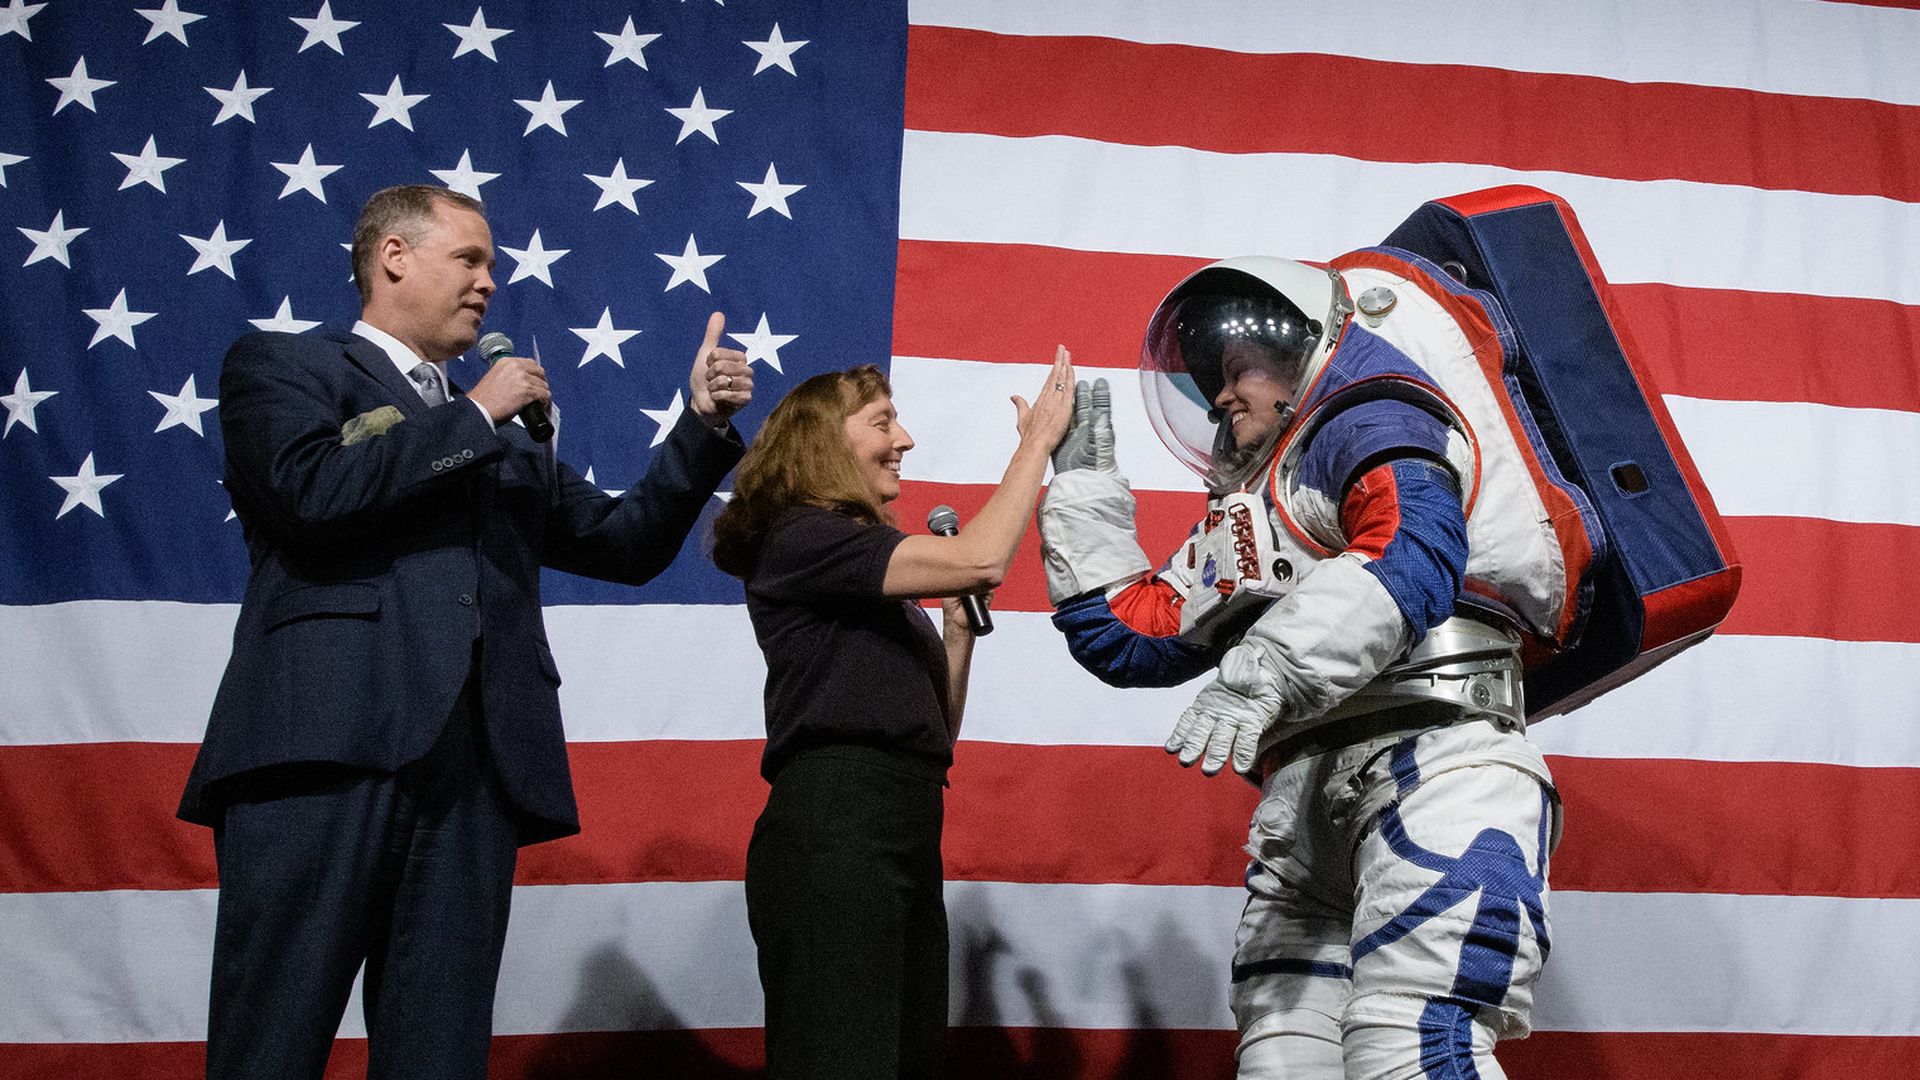 A person wears a spacesuit next to two other people in front of an American flag